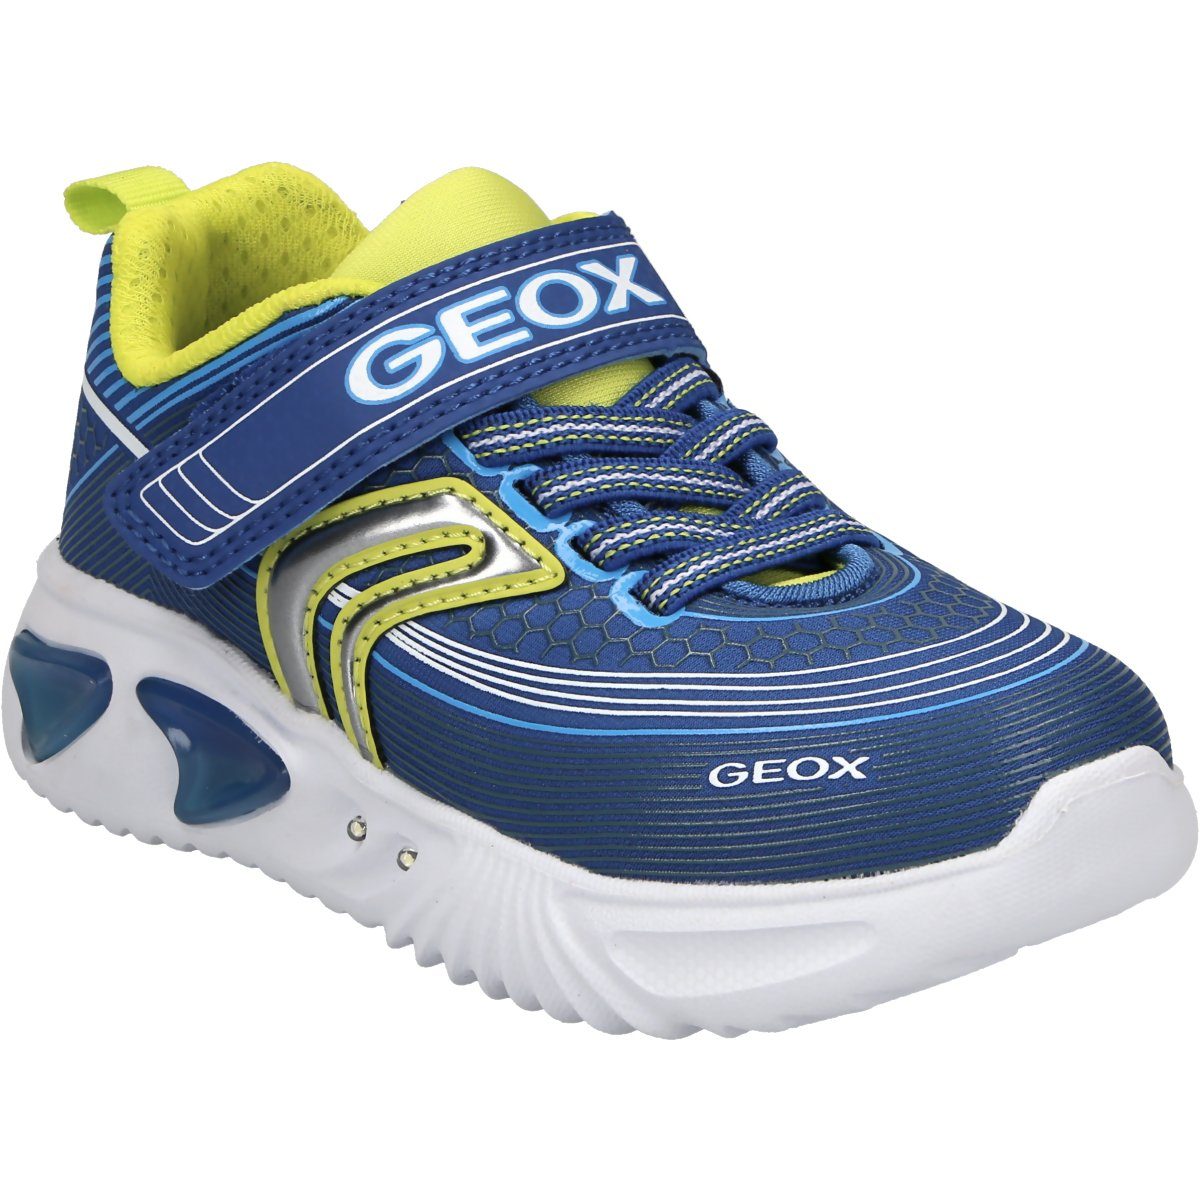 ASSISTER Geox ROYAL/LIME Sneaker